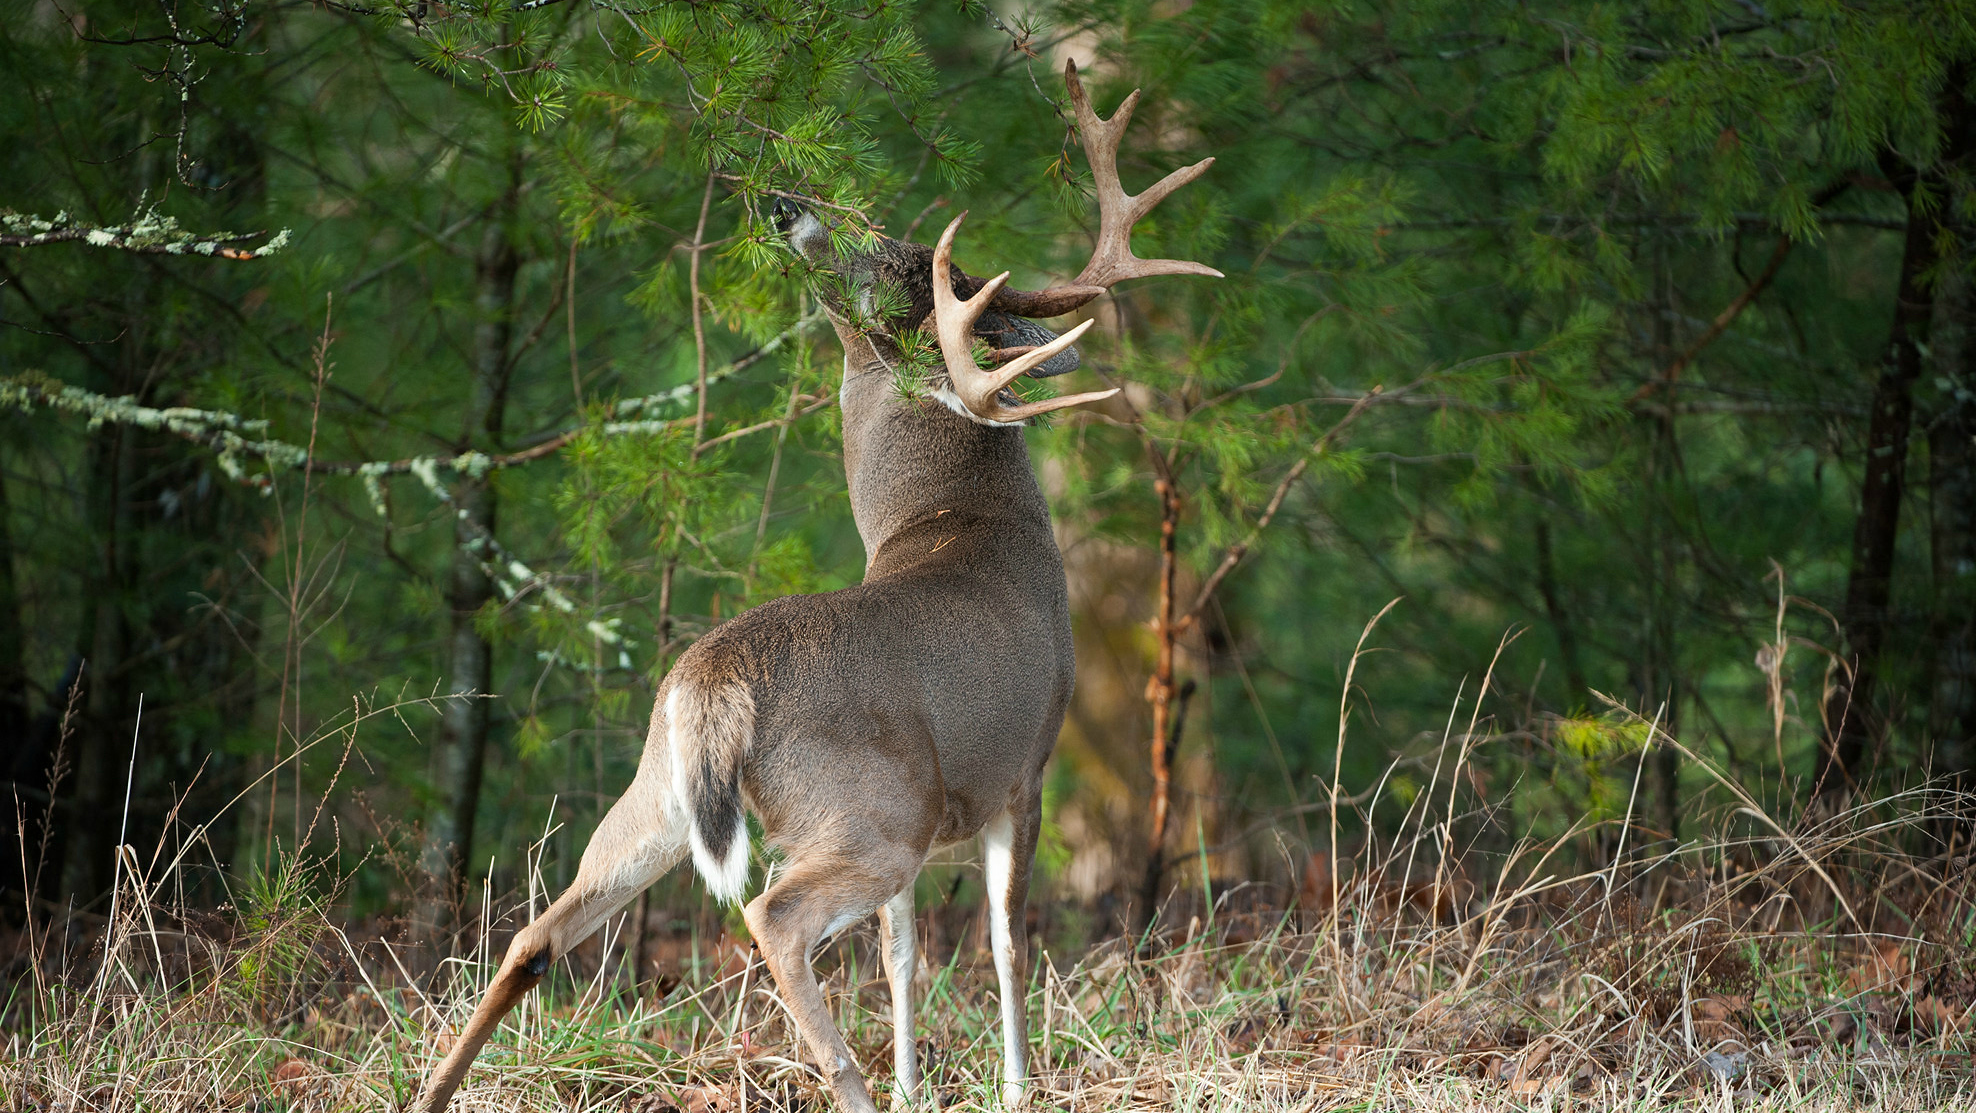 Human or Deer Urine Does It Make a Difference? MeatEater Wired To Hunt photo